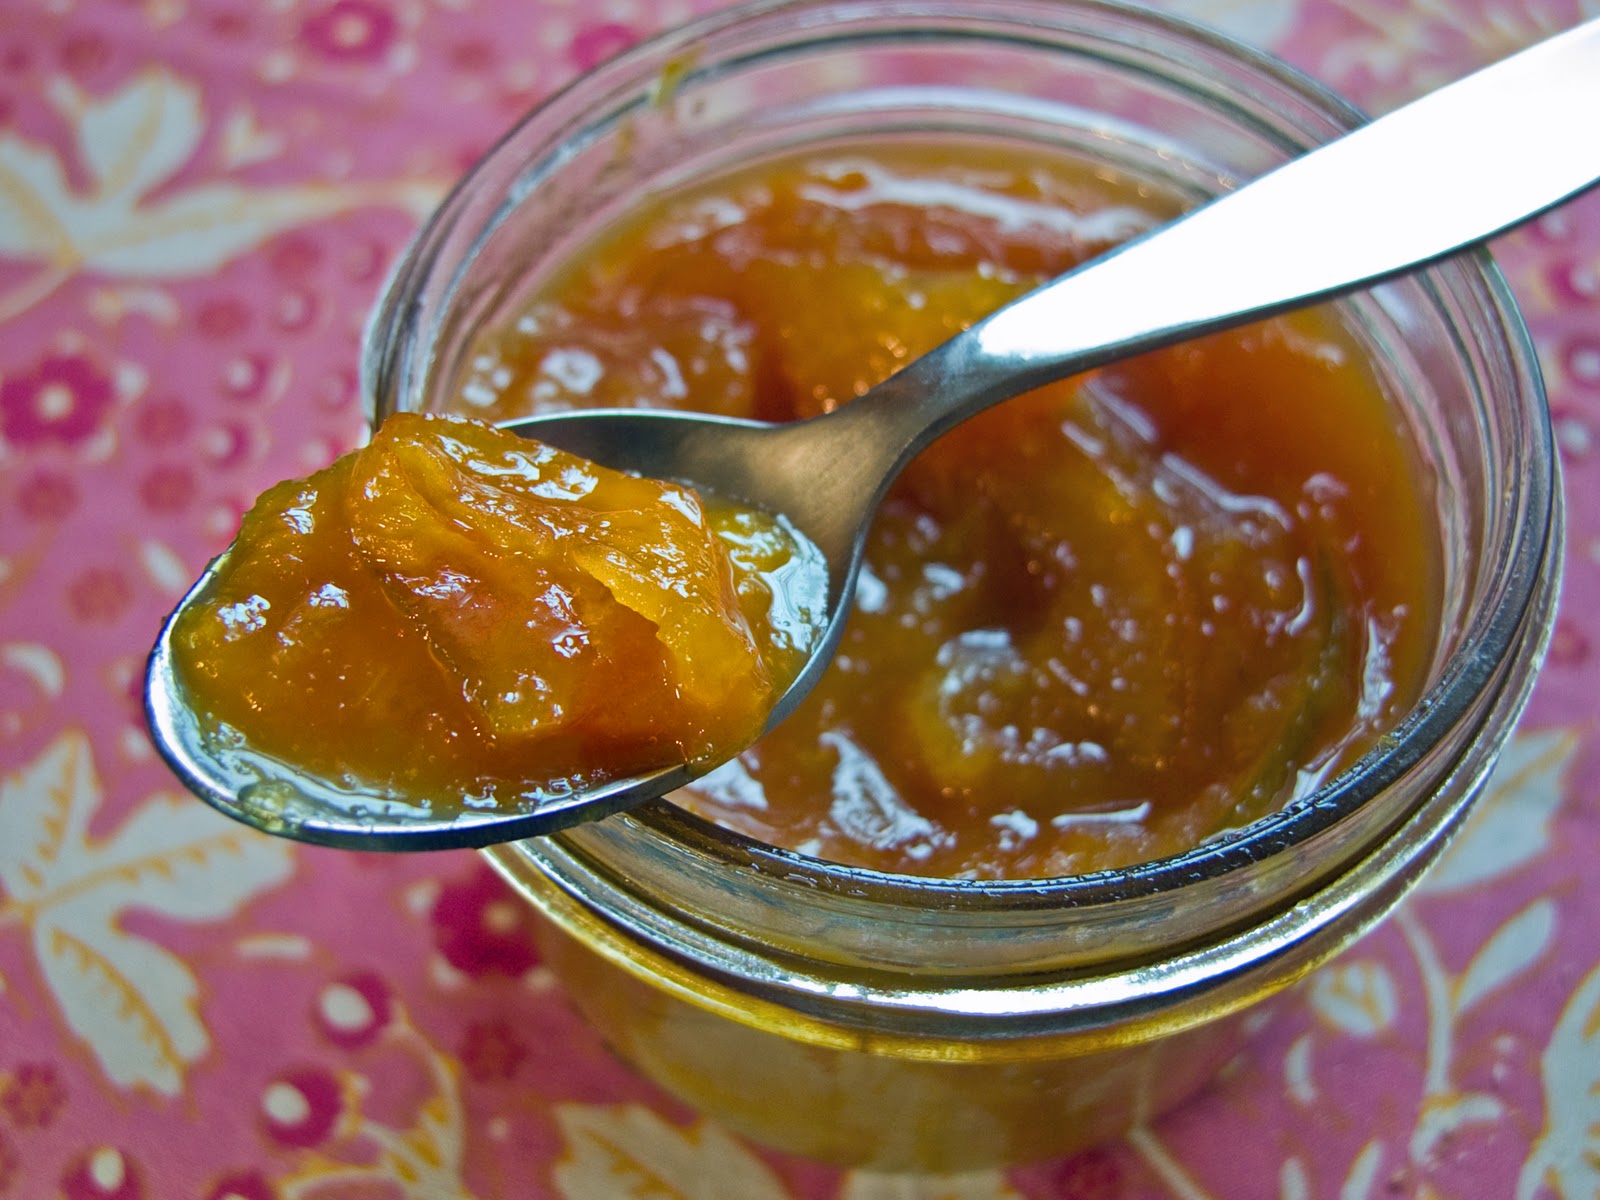 Cooking Weekends: Orange-Lime Marmalade with Agave Nectar